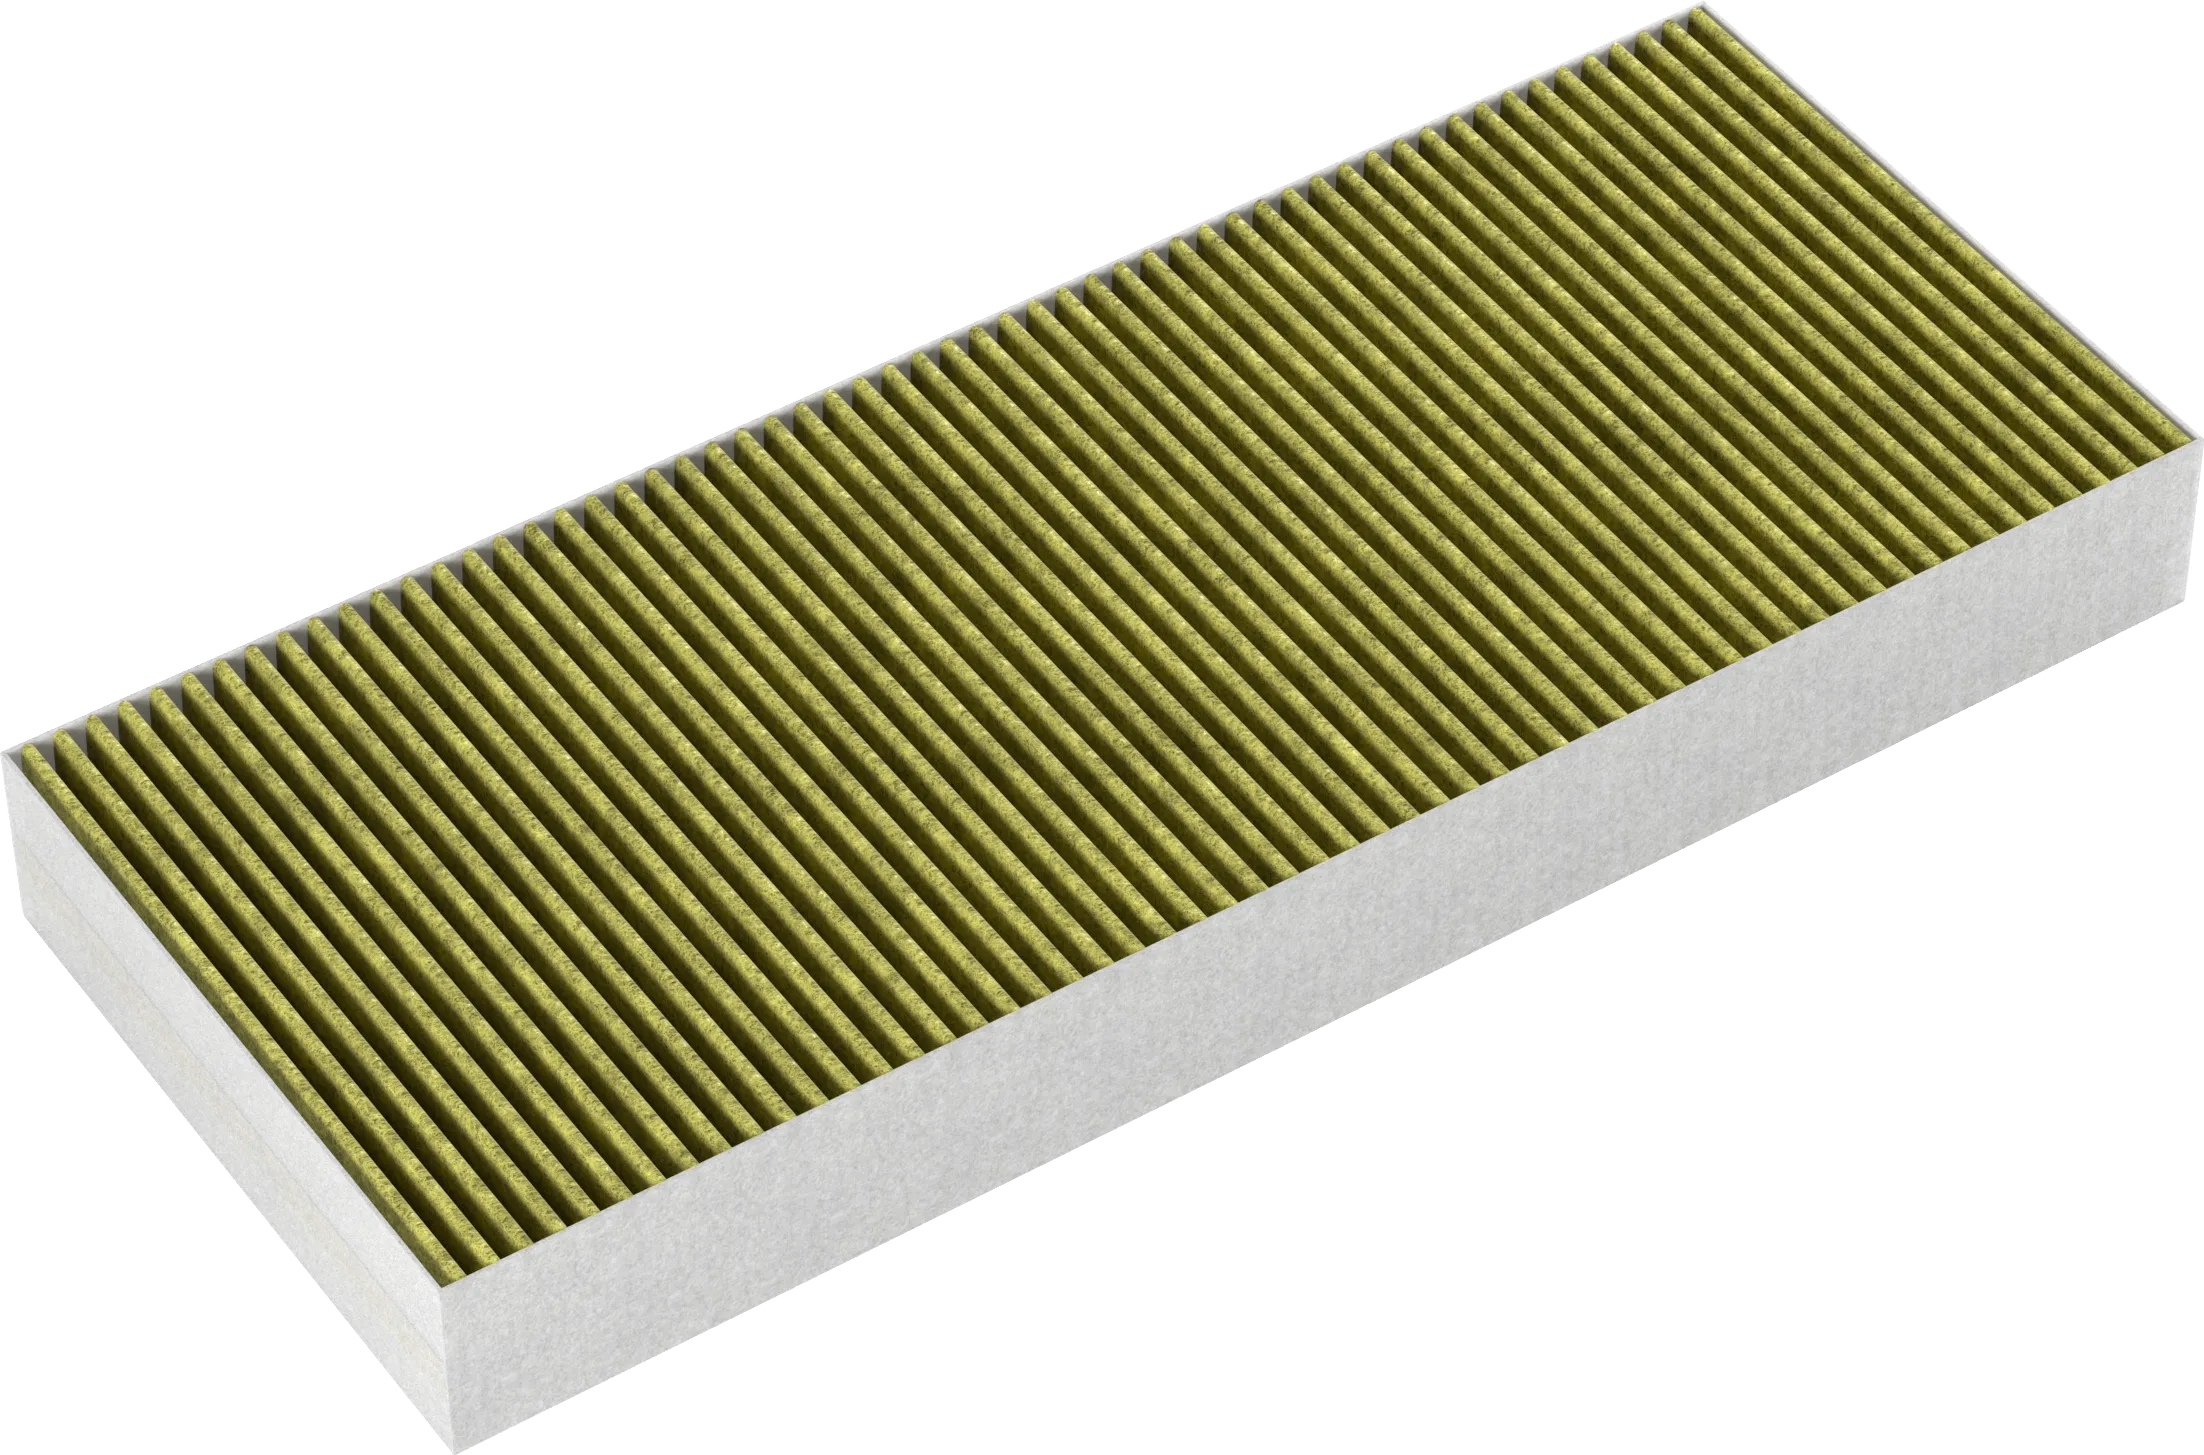 Anti-pollen functionality: The filter retains an extremely high amount of airborne pollen and deactivates allergens which are retained by the filter 